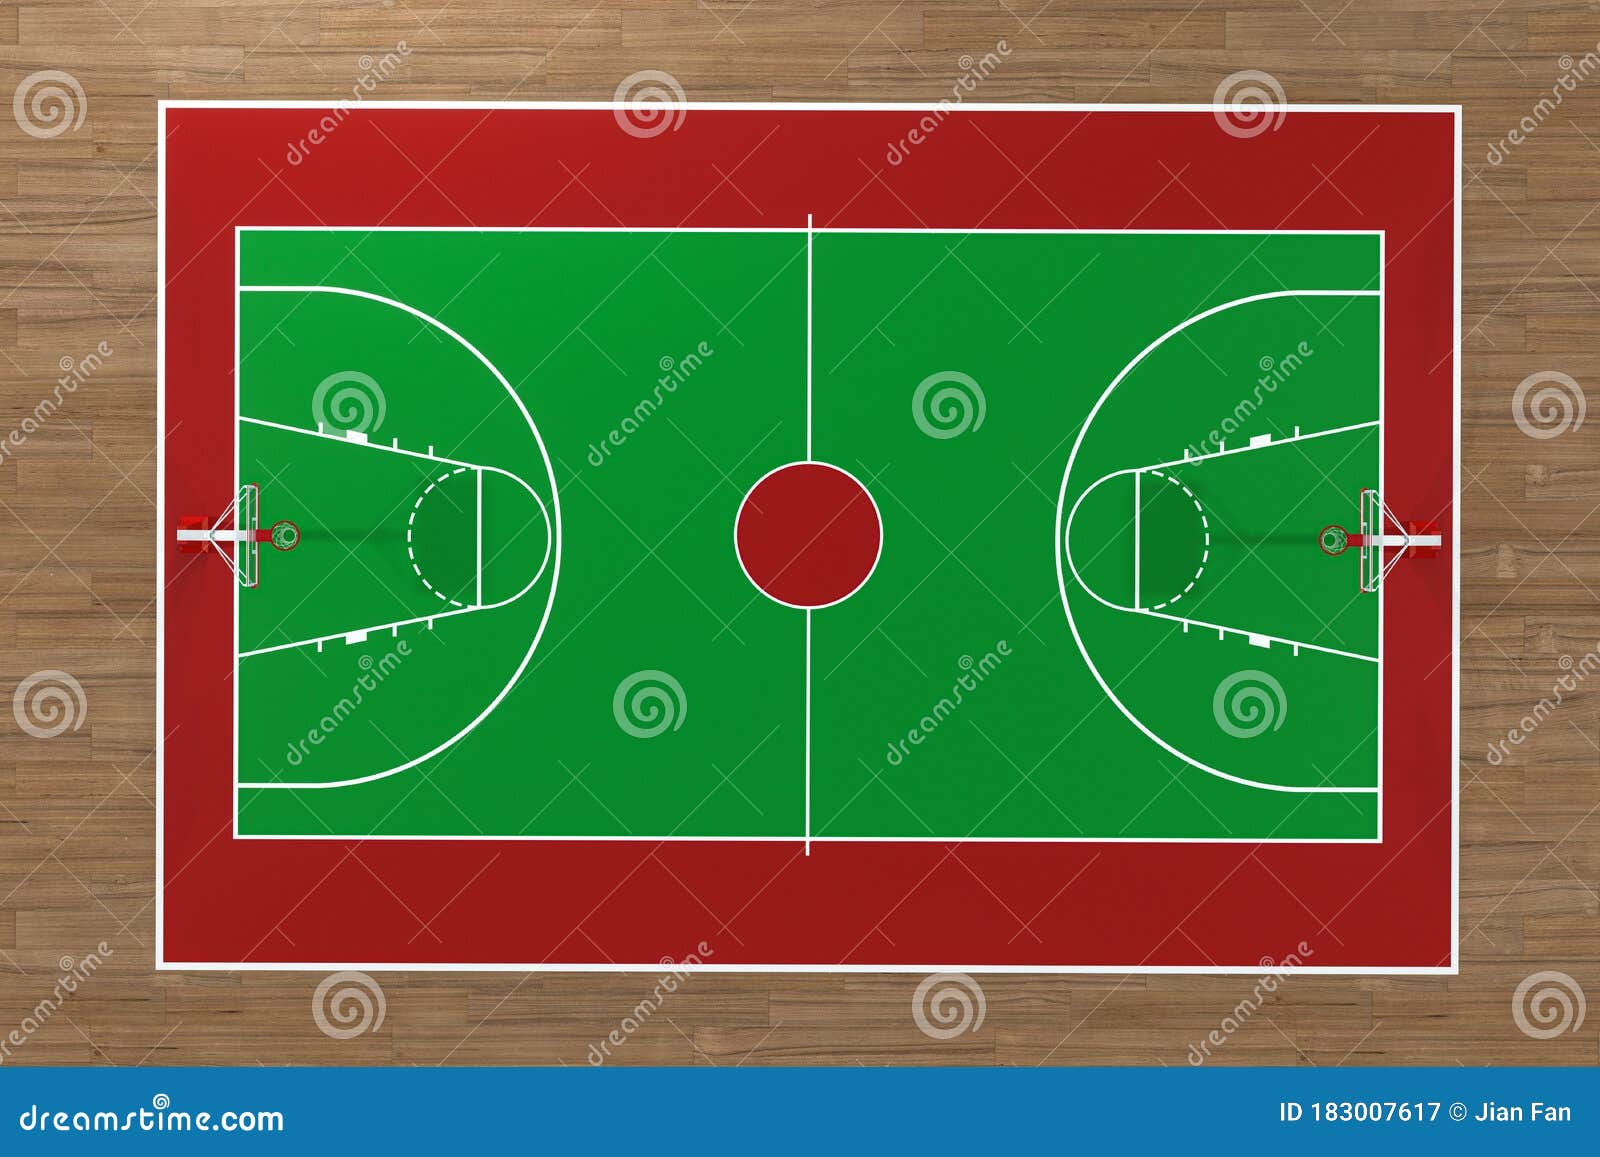 Top View Of Basketball Court With Wooden Floor, 3d